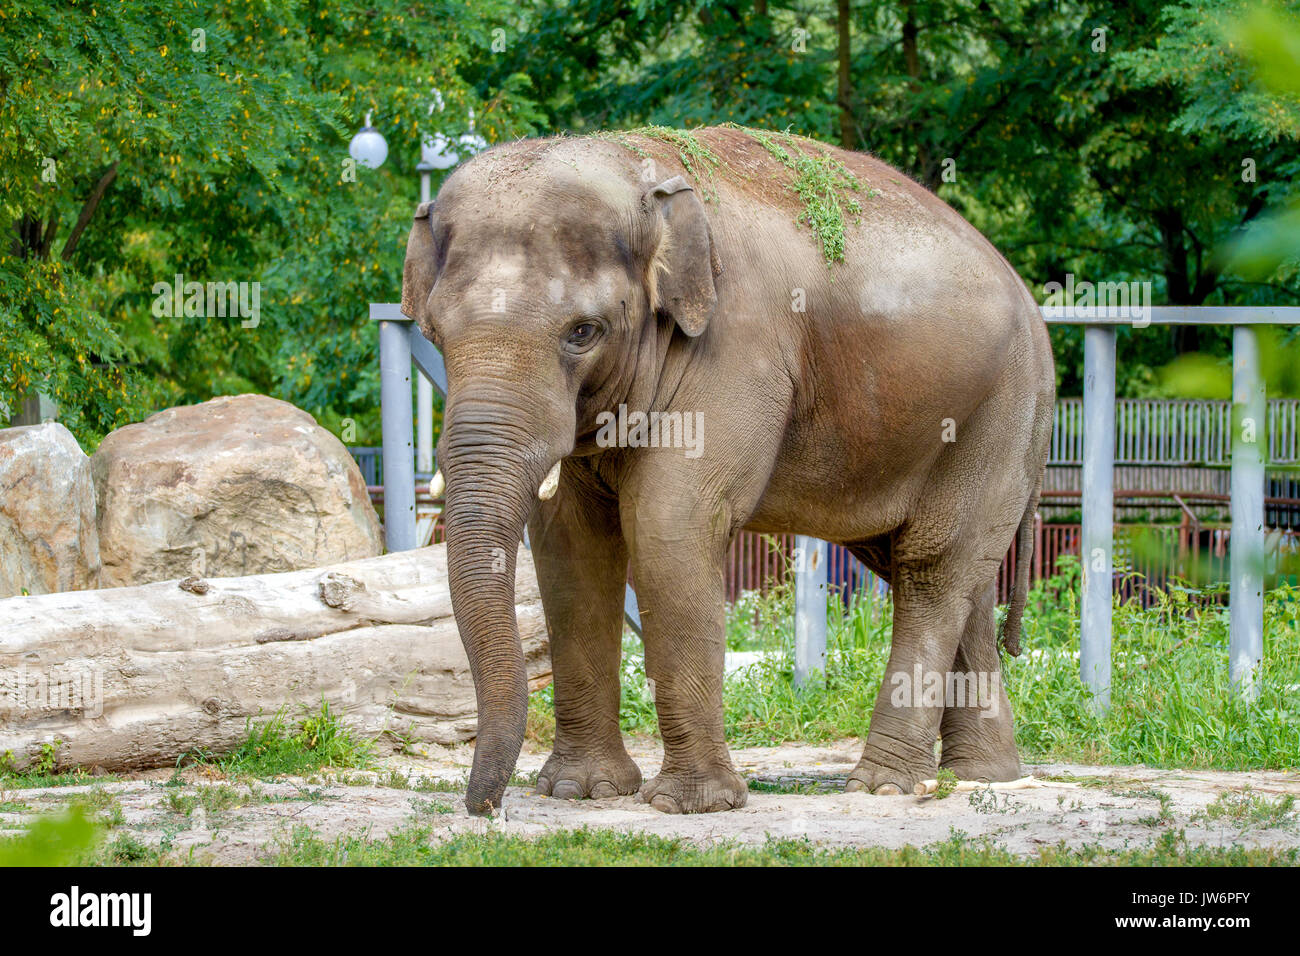 And the image of a large elephant walks in the enclosure of the zoo Stock Photo